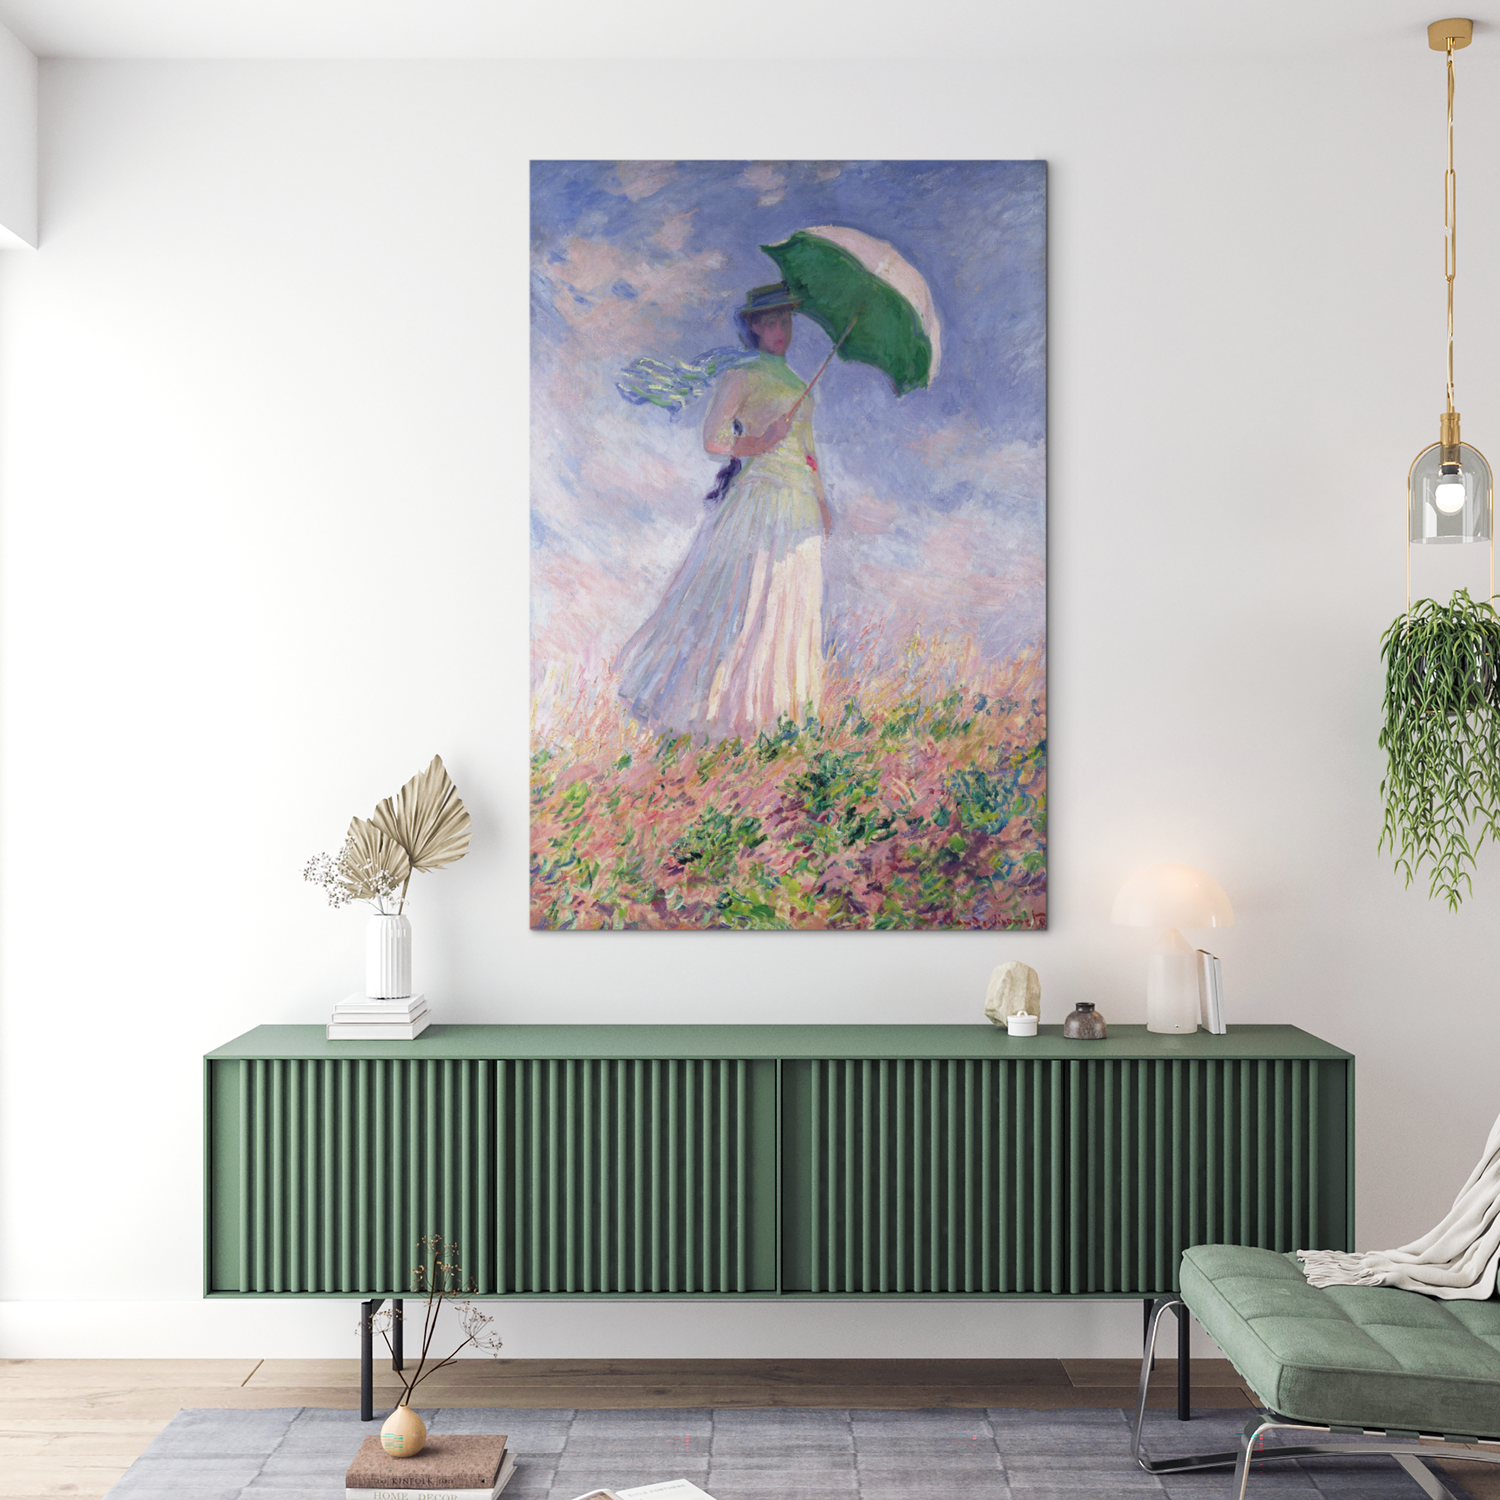 Reproduction Canvas Wall Art - Woman With Parasol